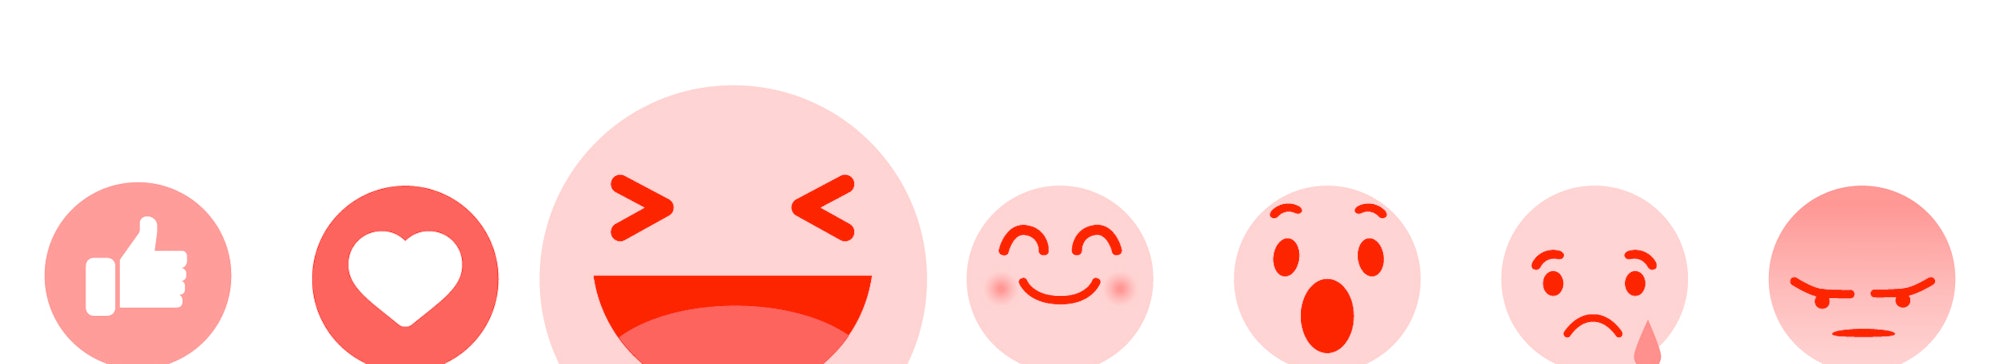 Modern Flat Design Vector Facebook Emoji Set with Different Reactions for Social Network. Vector ill...